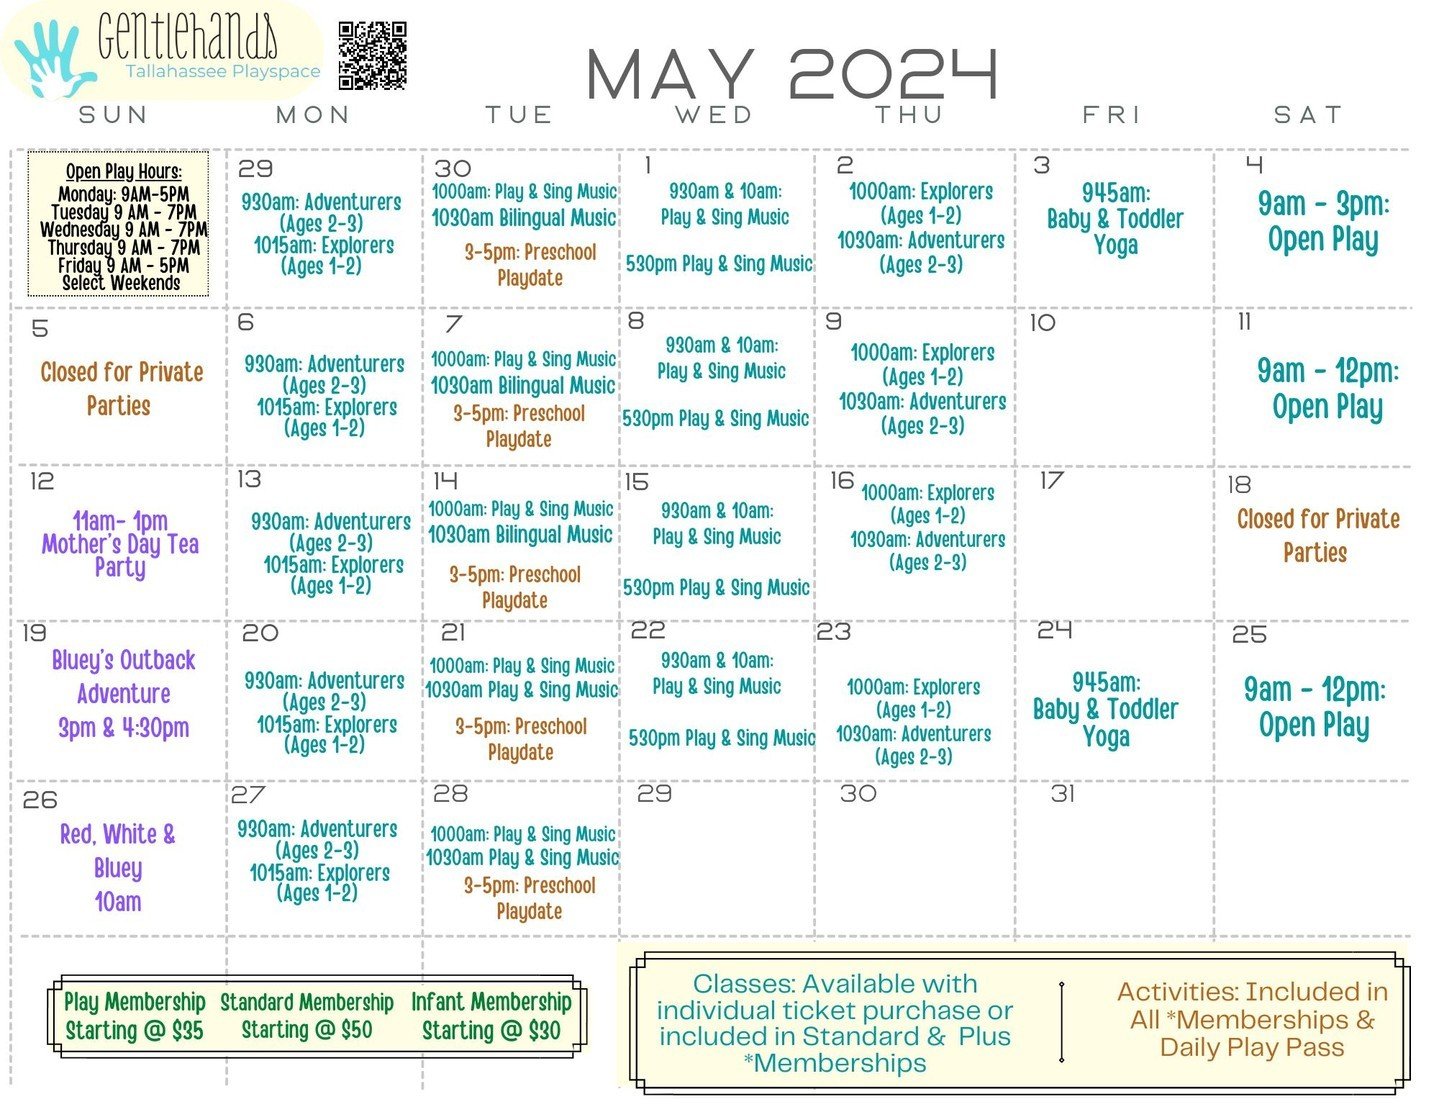 Plan your May play, class, and event times! Special notes for this month include:

-There are 3 Saturday play times. We will have Saturday play every Saturday through the summer as well. We are working on adding music classes and will update you if t